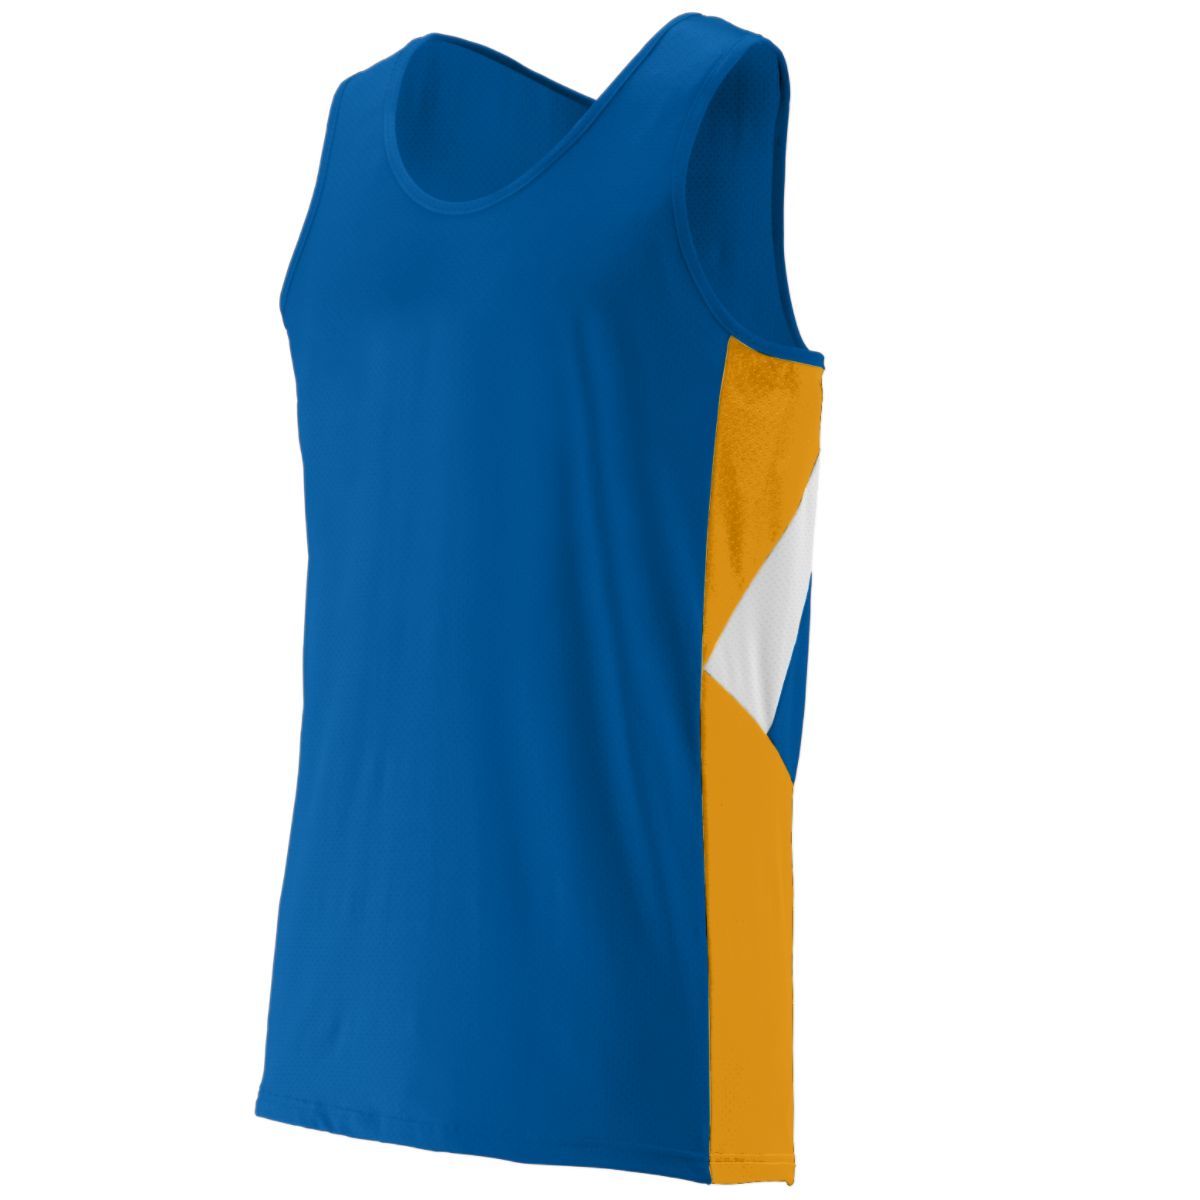 Augusta Sportswear Sprint Jersey in Royal/Gold/White  -Part of the Adult, Adult-Jersey, Augusta-Products, Track-Field, Shirts product lines at KanaleyCreations.com